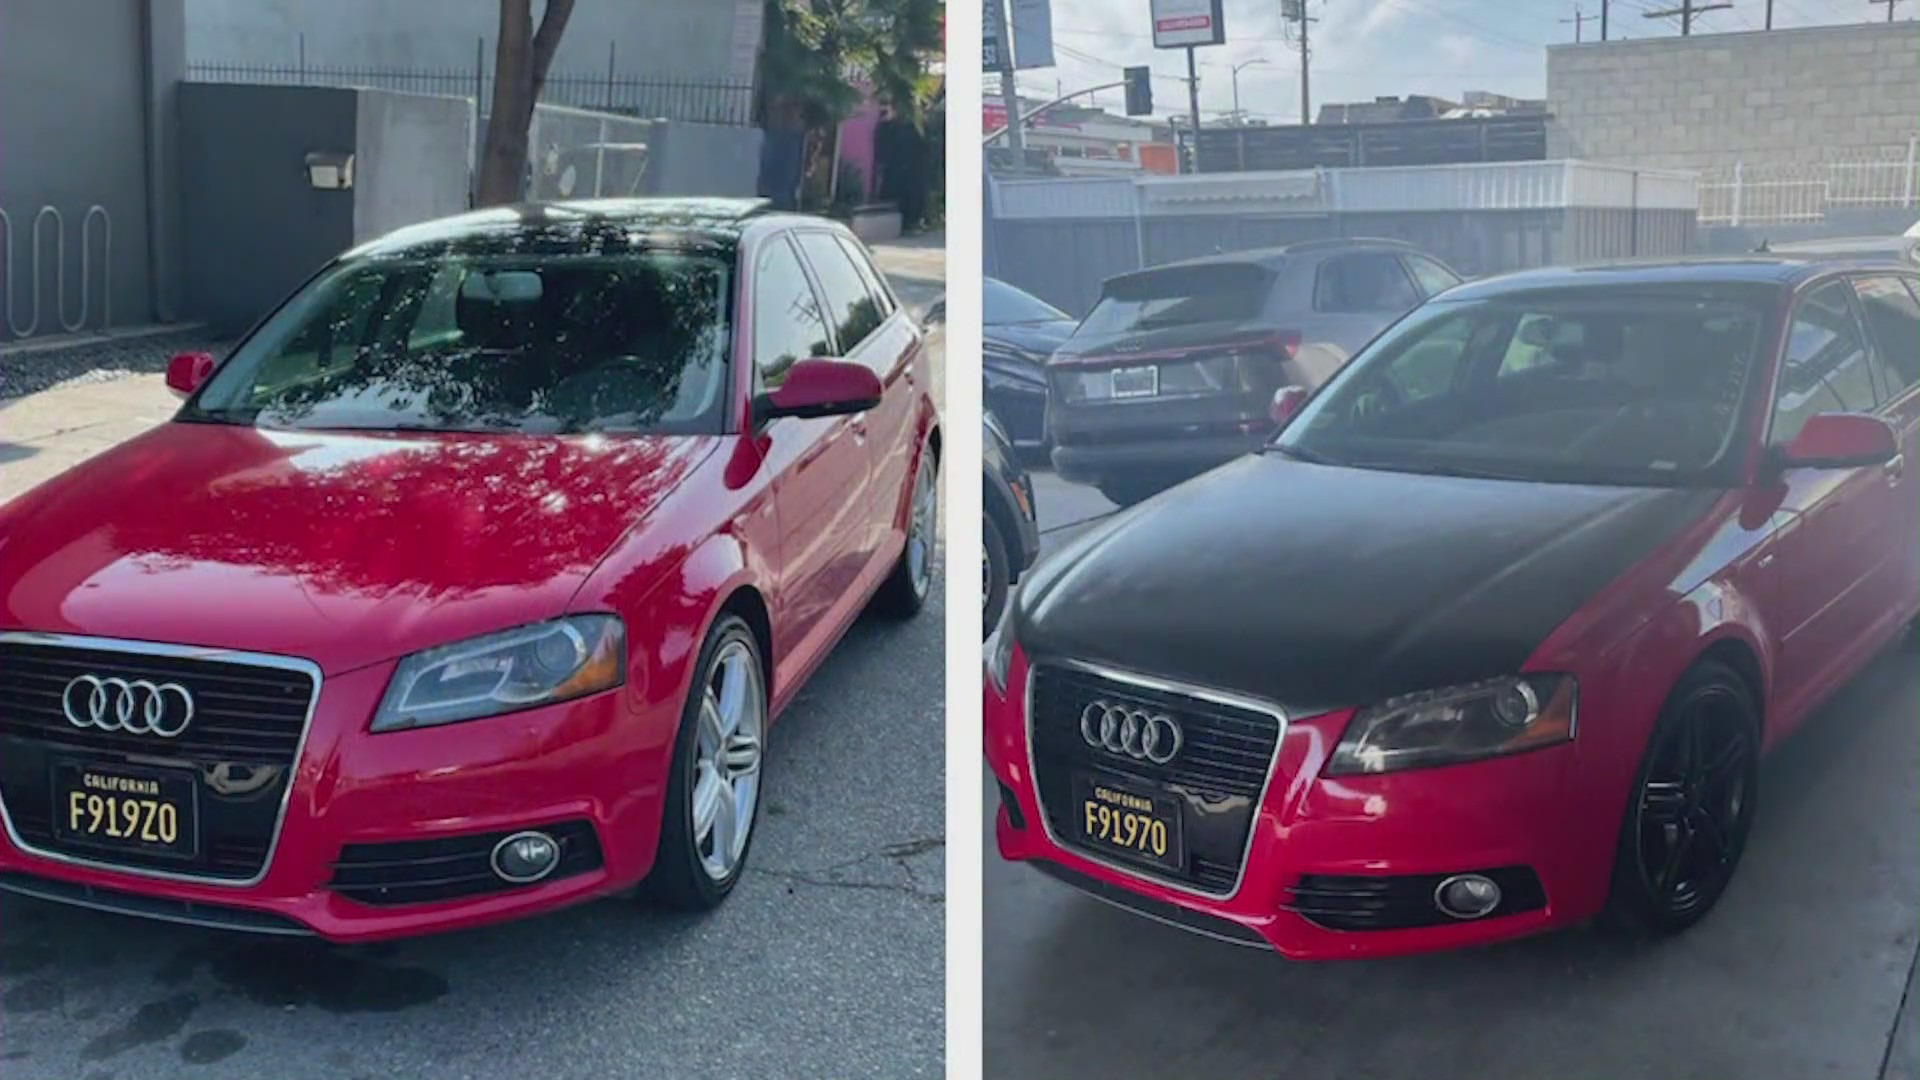 A woman named Samantha said her car, shown in these undated photos she provided, is one of several stolen or broken into by the same man in the Silver Lake and Echo Park areas.